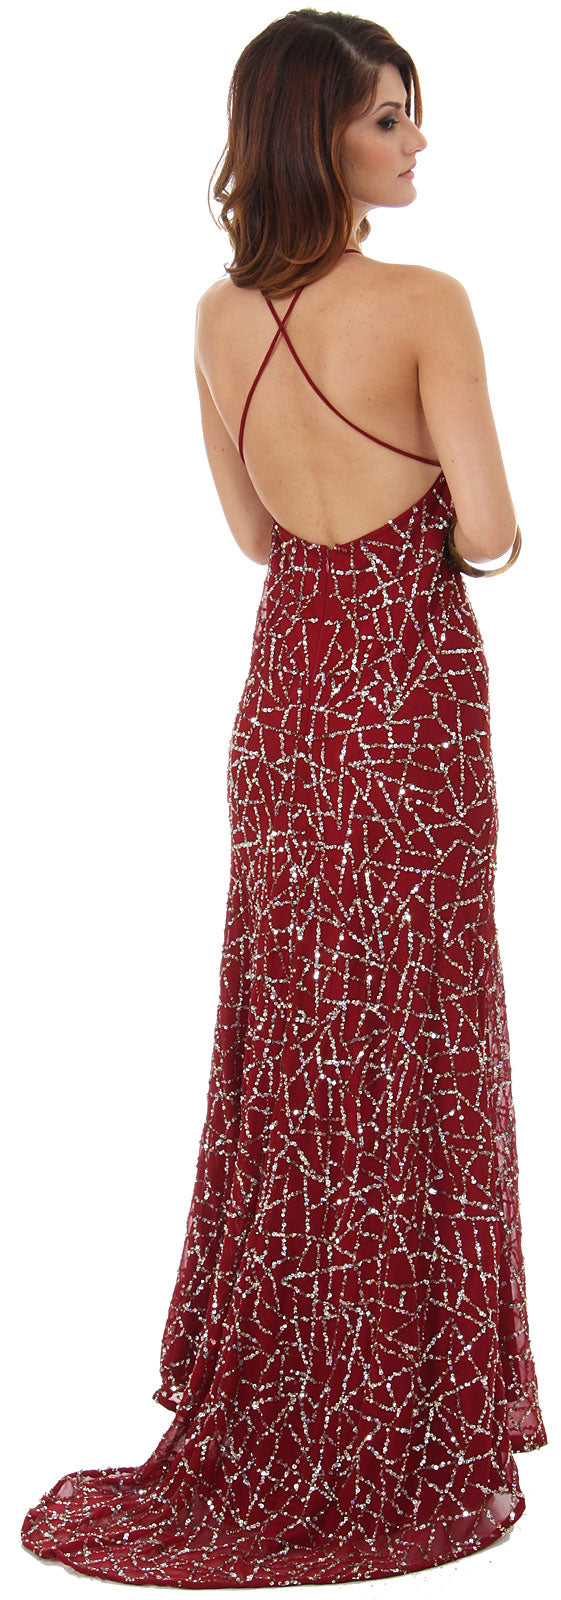 Image of Halter Neck Sequined Long Formal Prom Dress With Train back in Burgundy